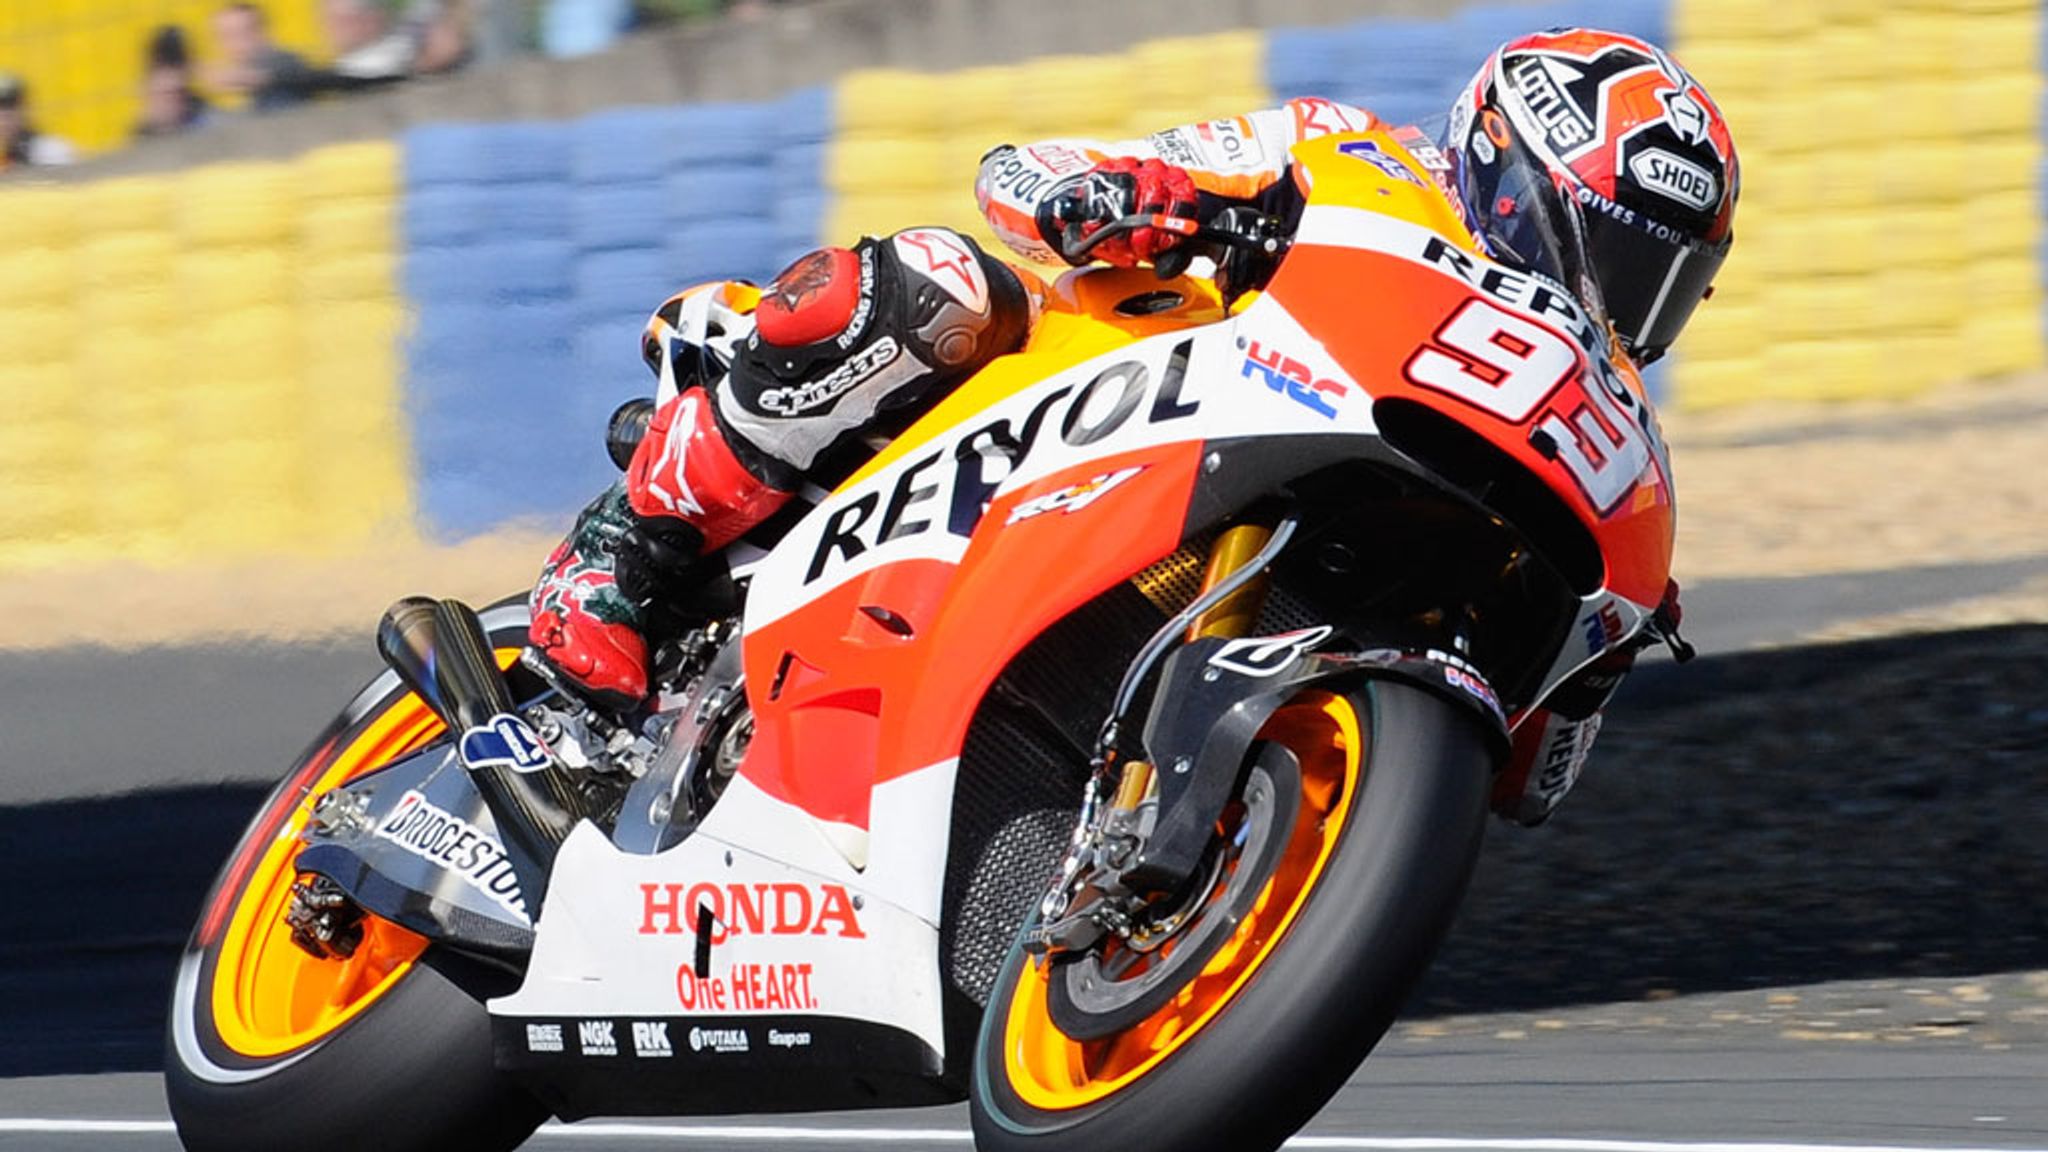 MotoGP Marc Marquez continues perfect start to season with fifth straight win Motor Racing News Sky Sports